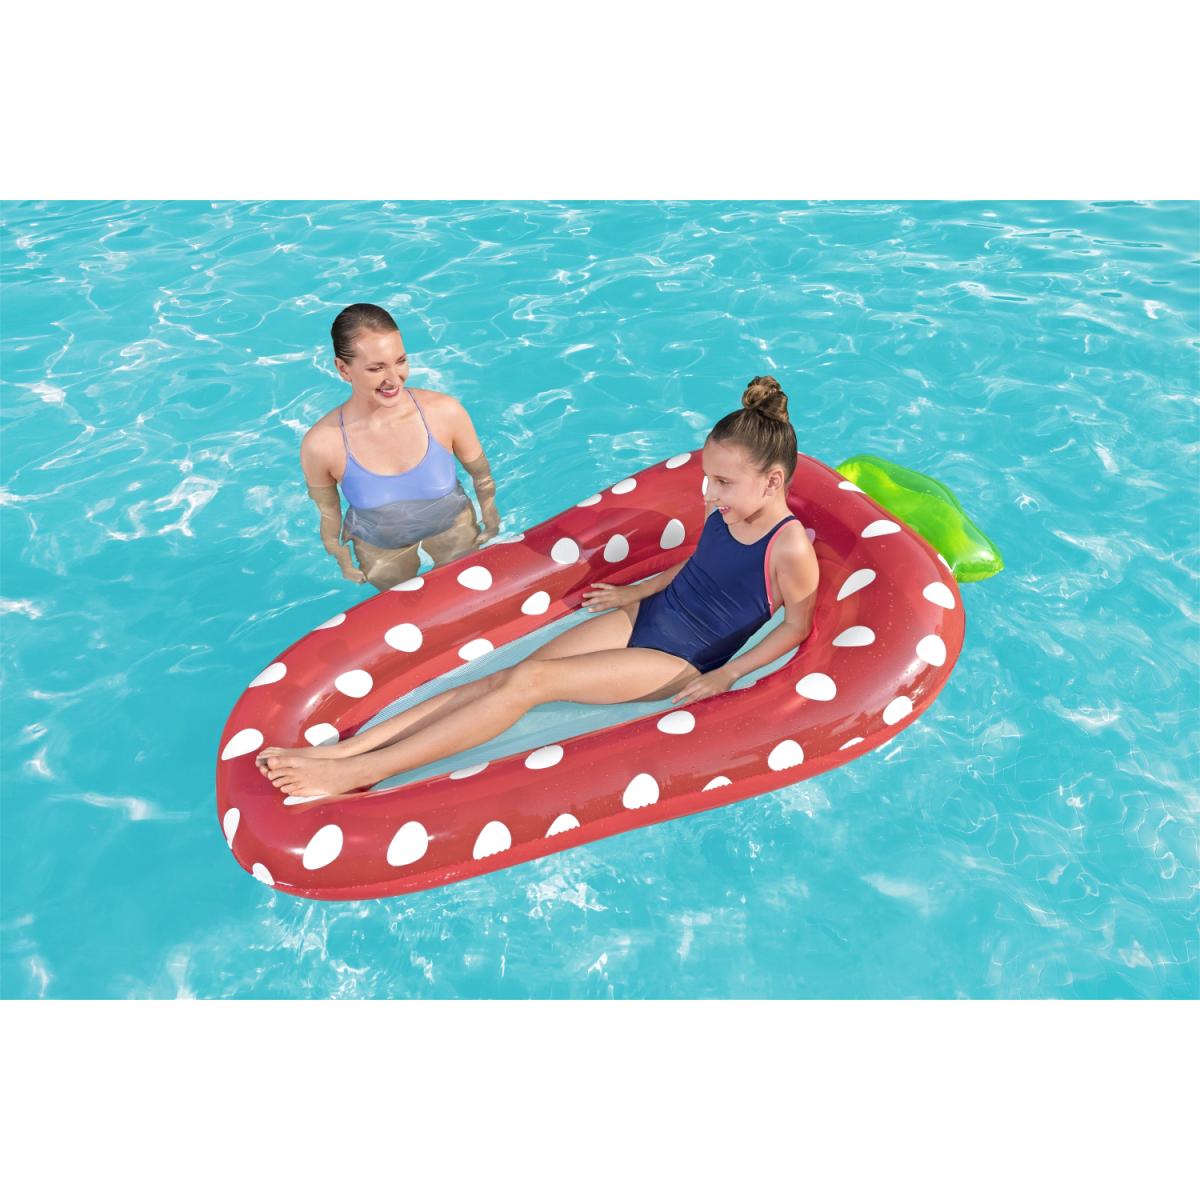 FLOTADOR INFLABLE TIPO LOUNGE